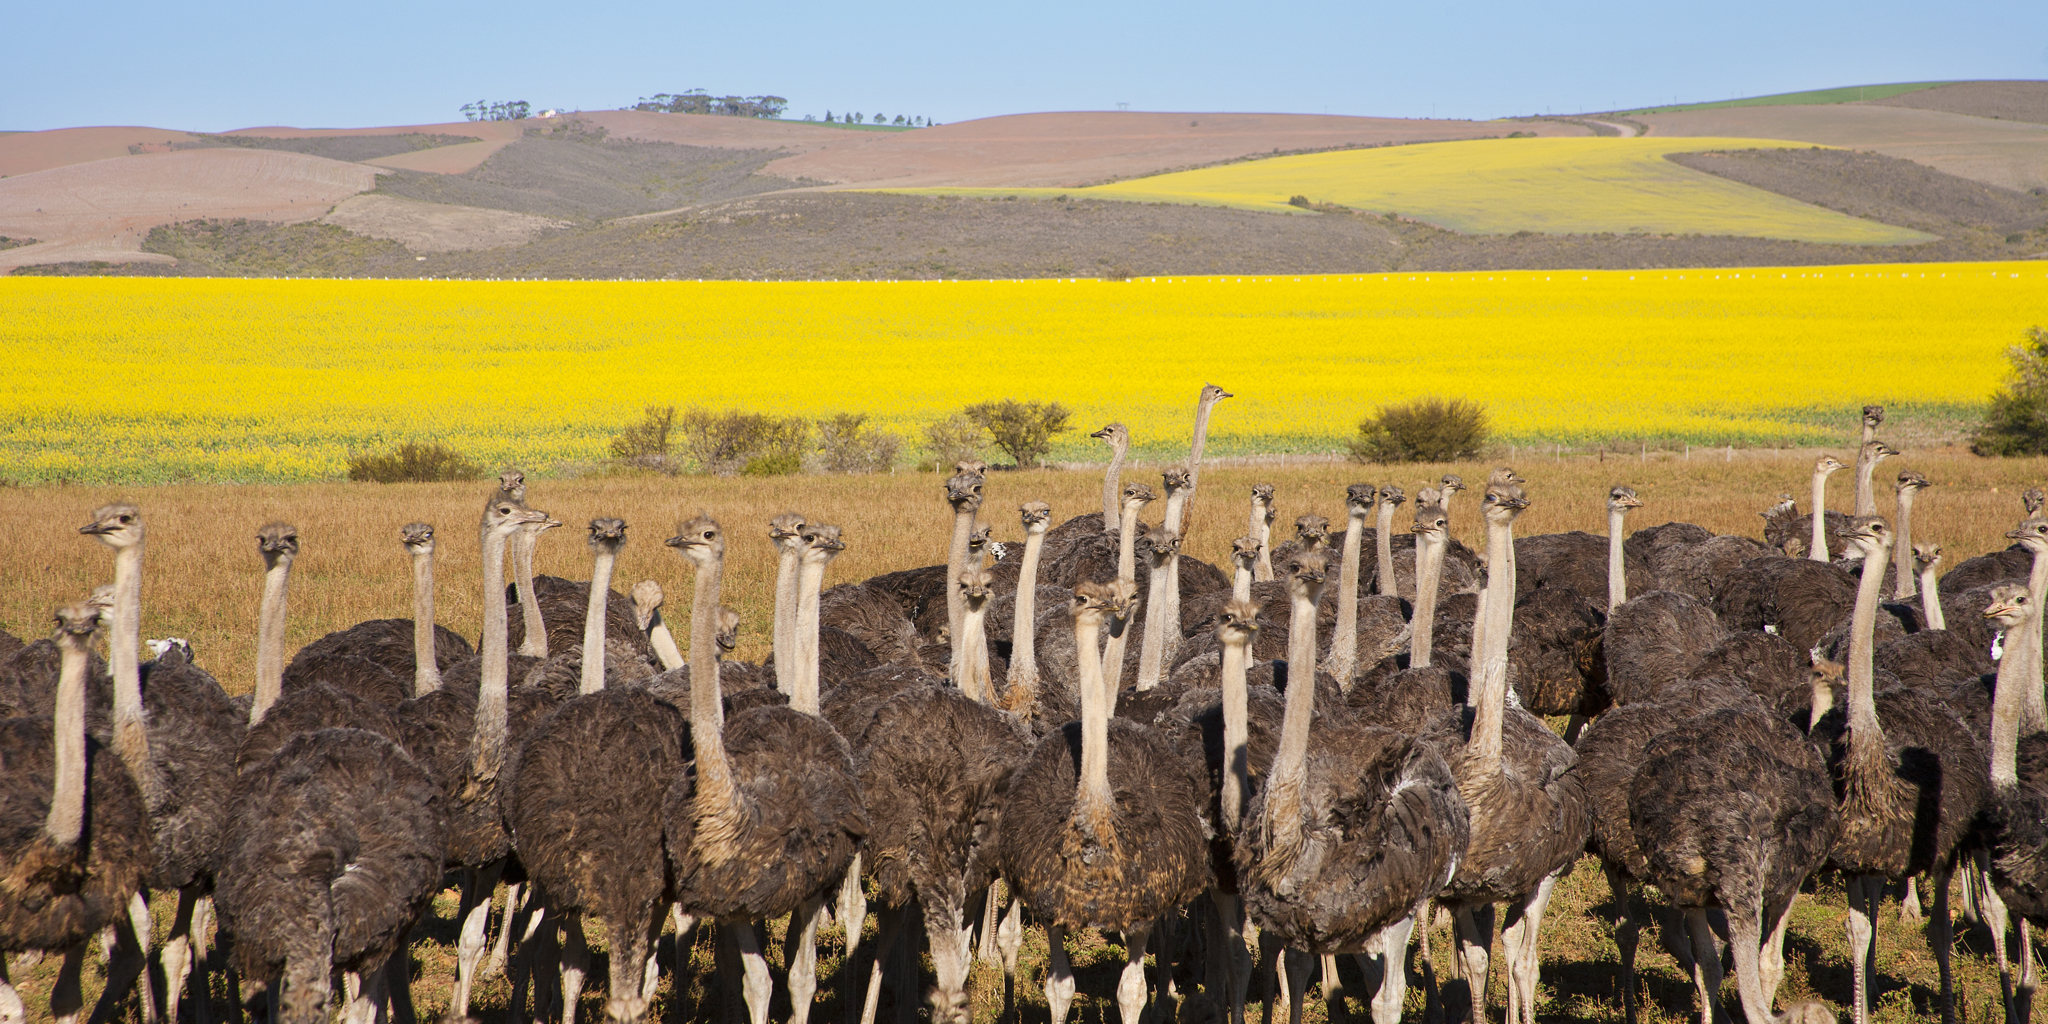 ostrich in the garden route, south africa safaris